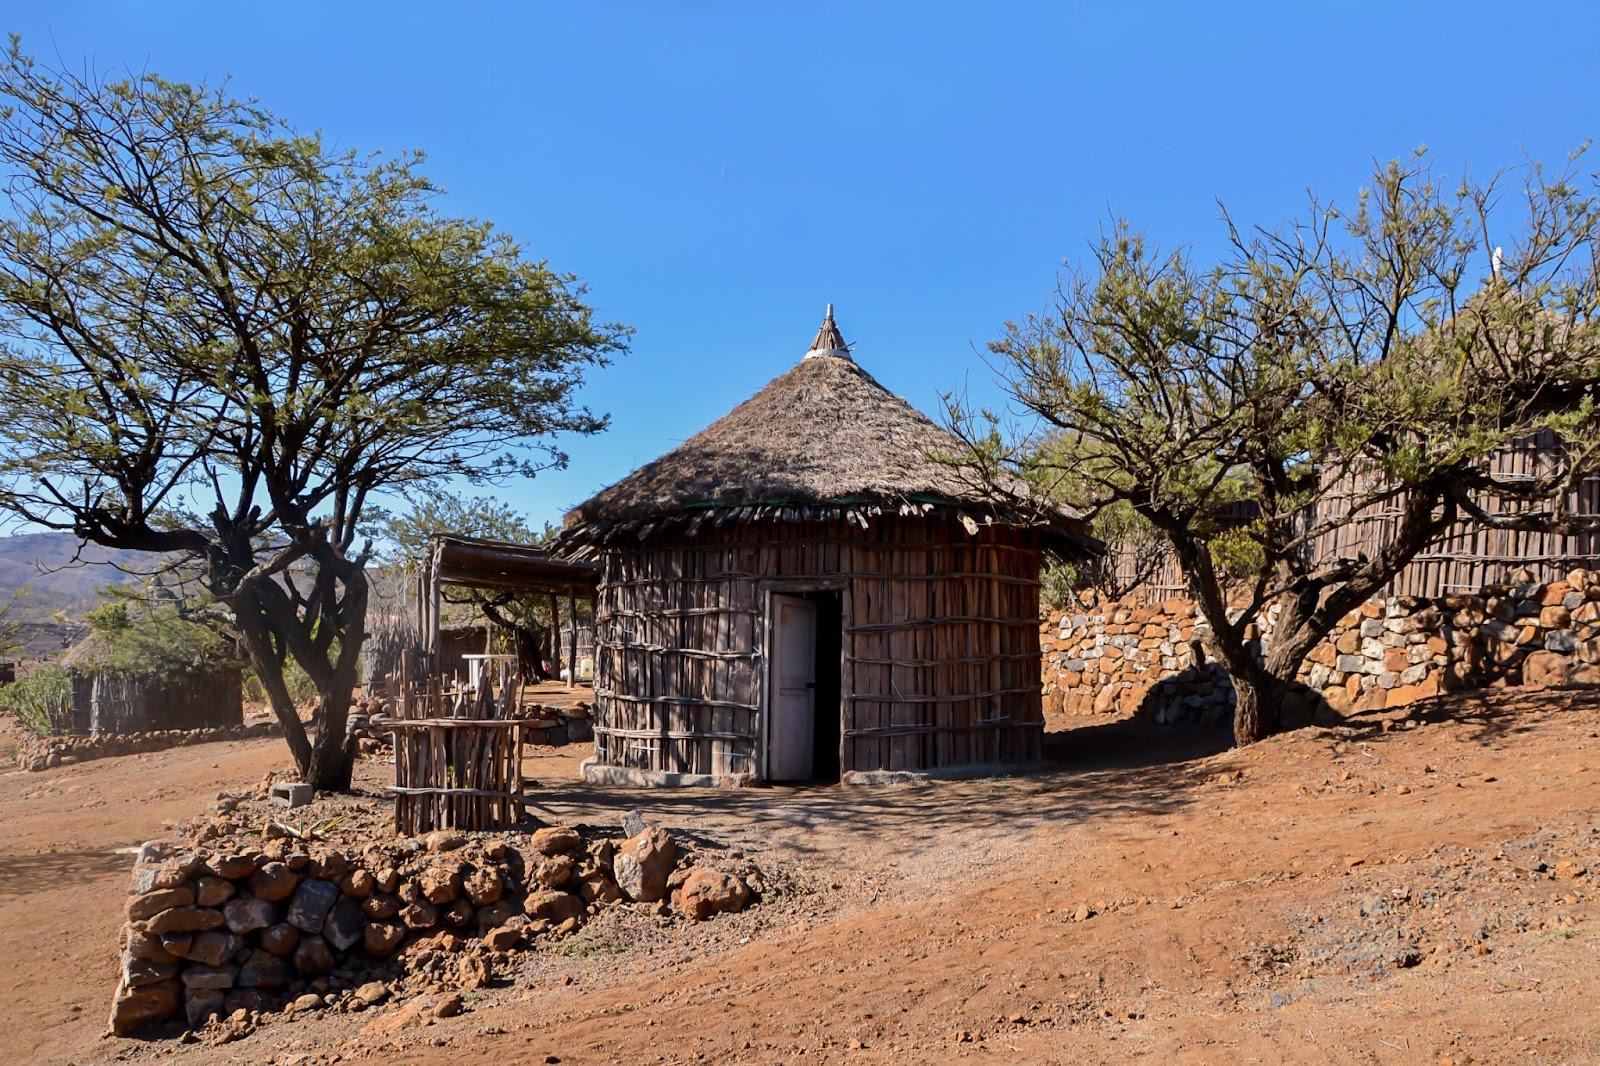 Typical rounded Djiboutian huts in a village in northern Djibouti